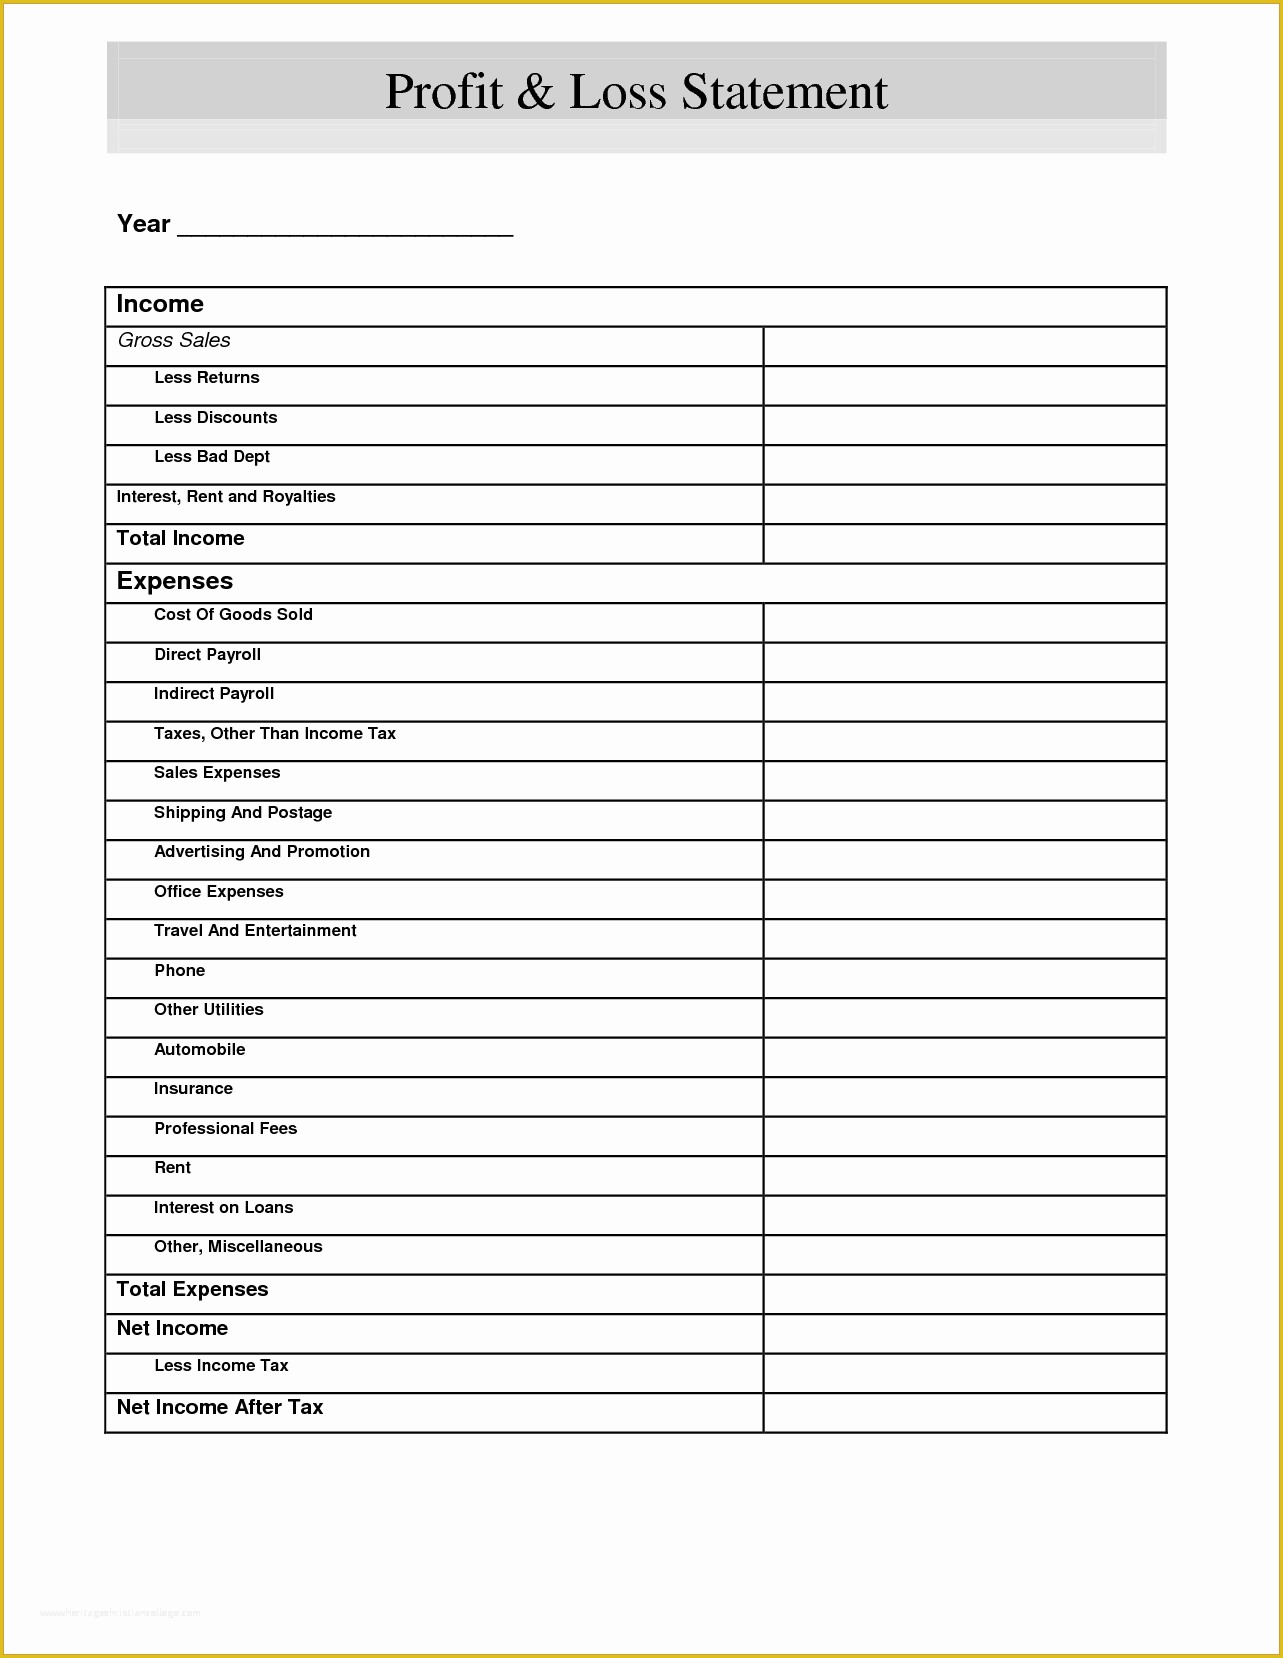 Free Profit and Loss Template Of Free Profit and Loss Statement Template form